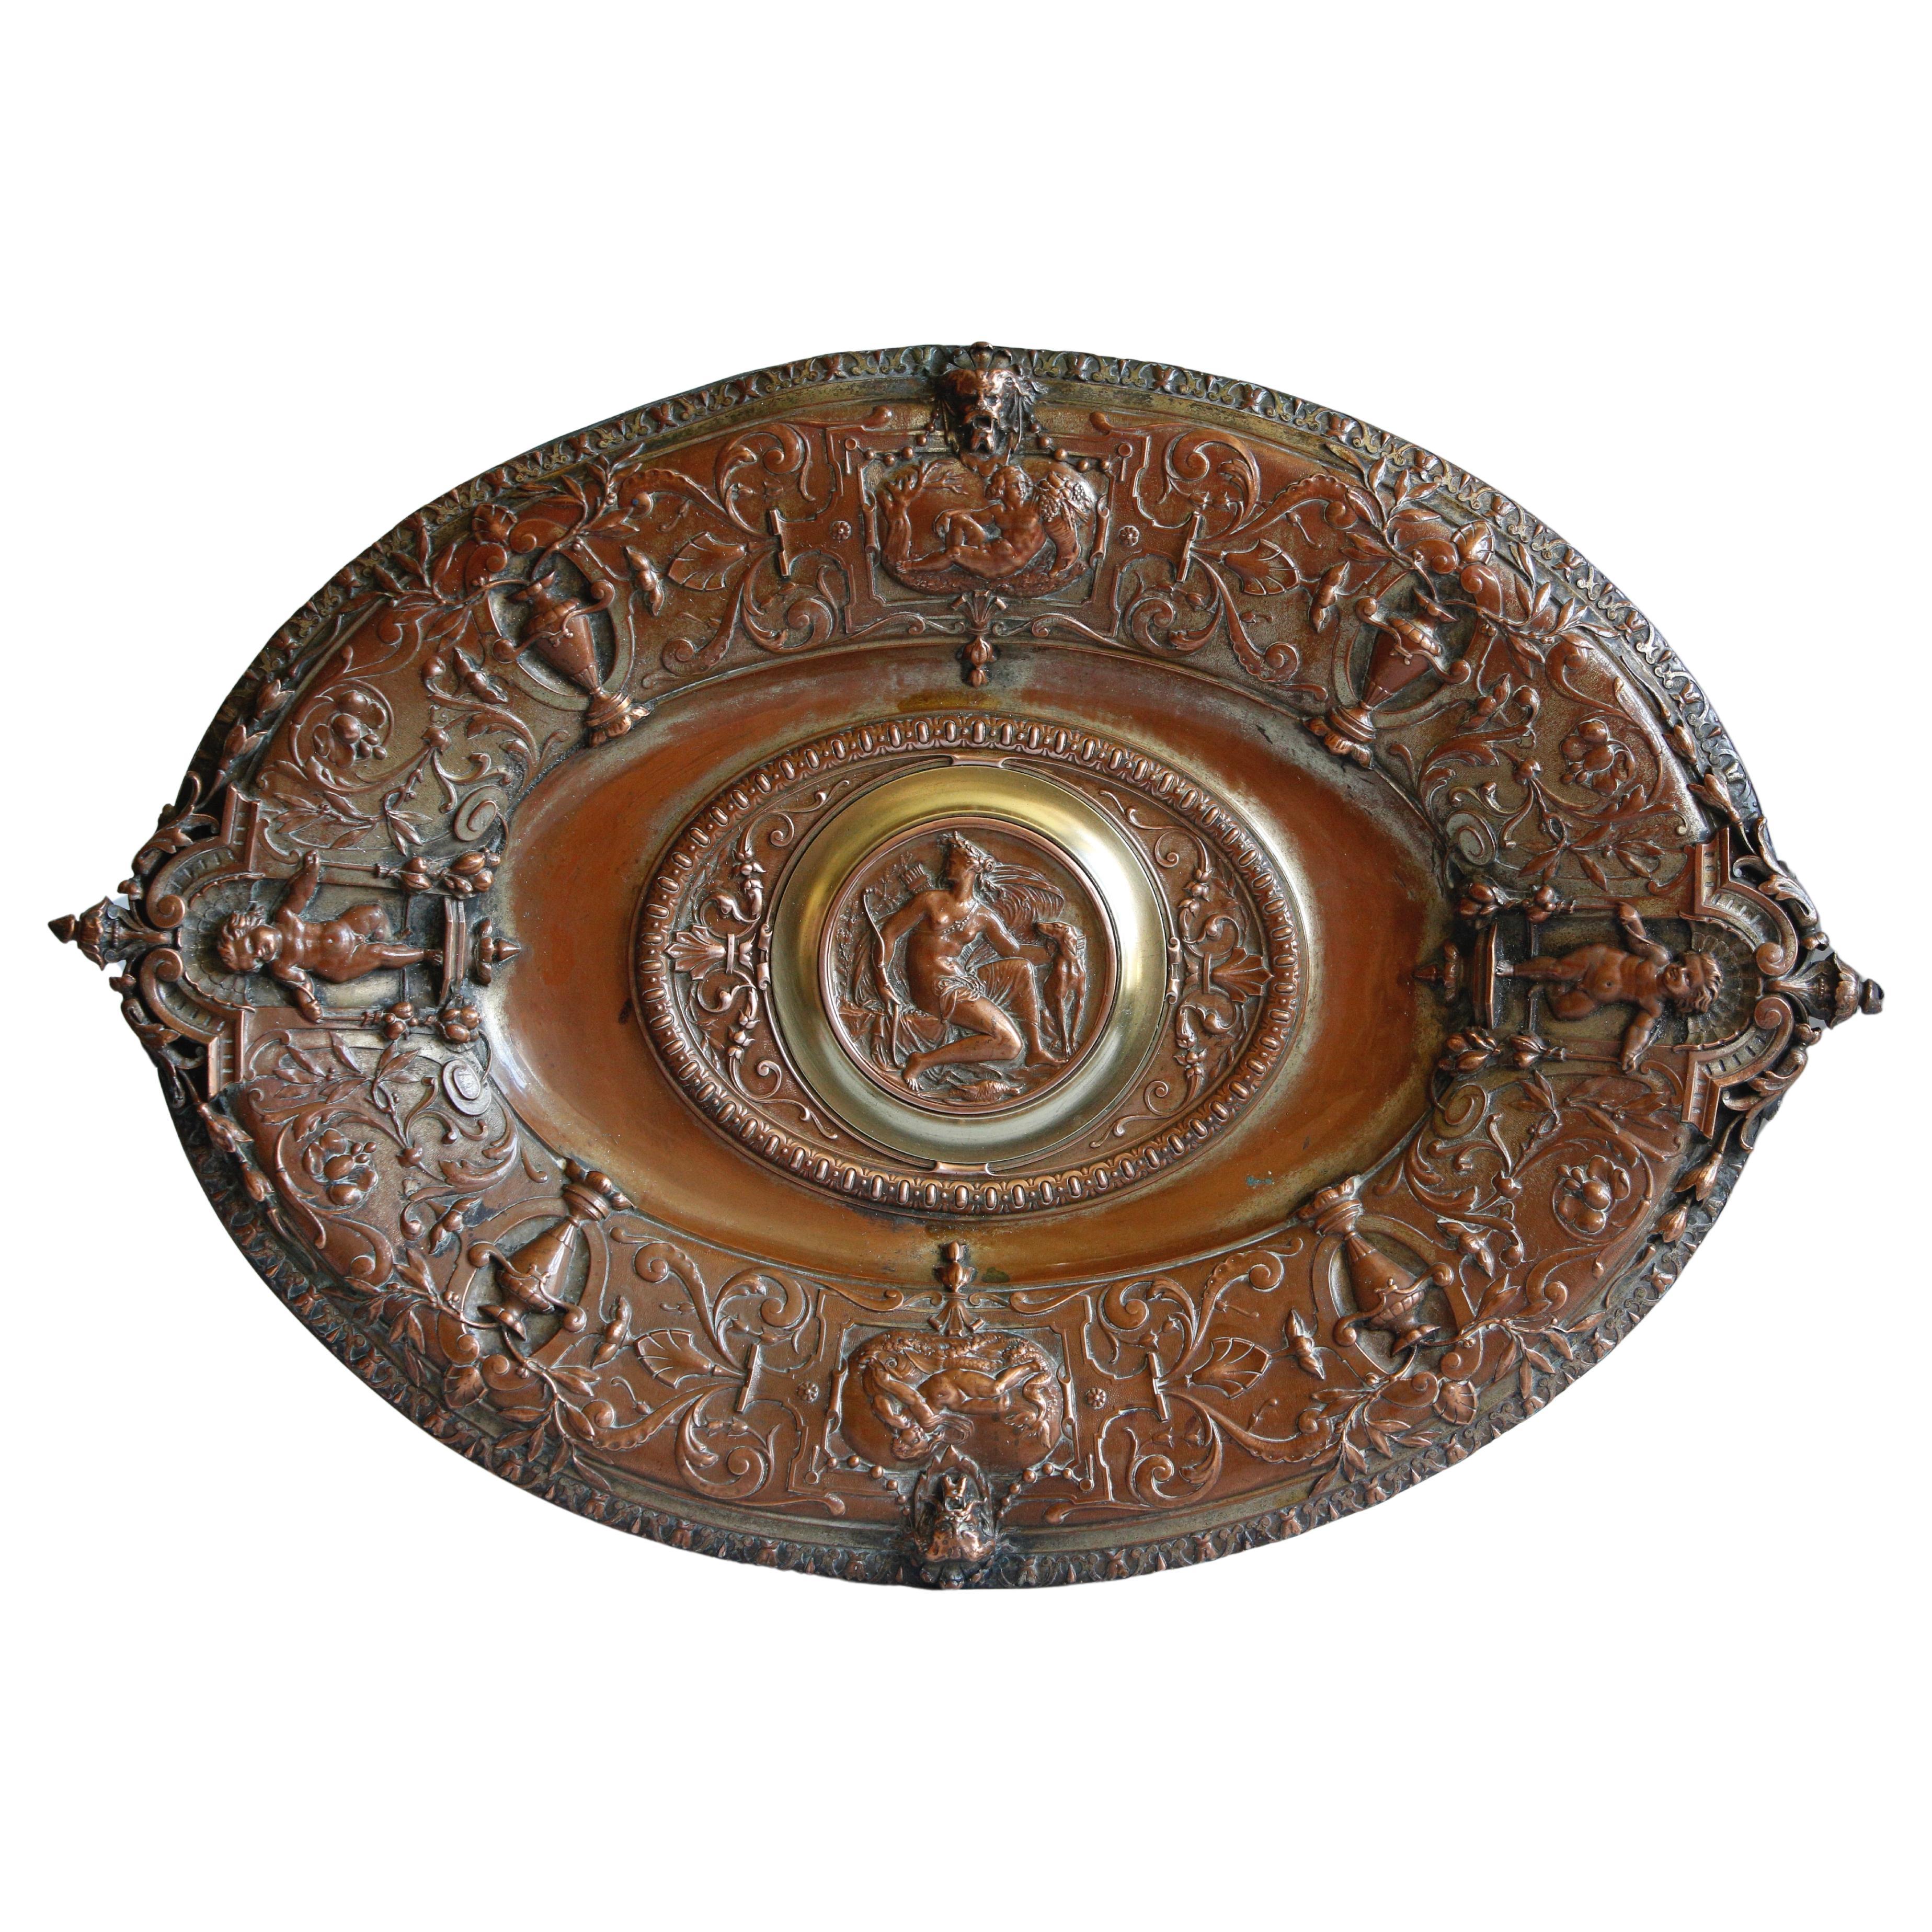 Dish Bowl Oval Copper Brass Plaque Diana The Huntress 19th C